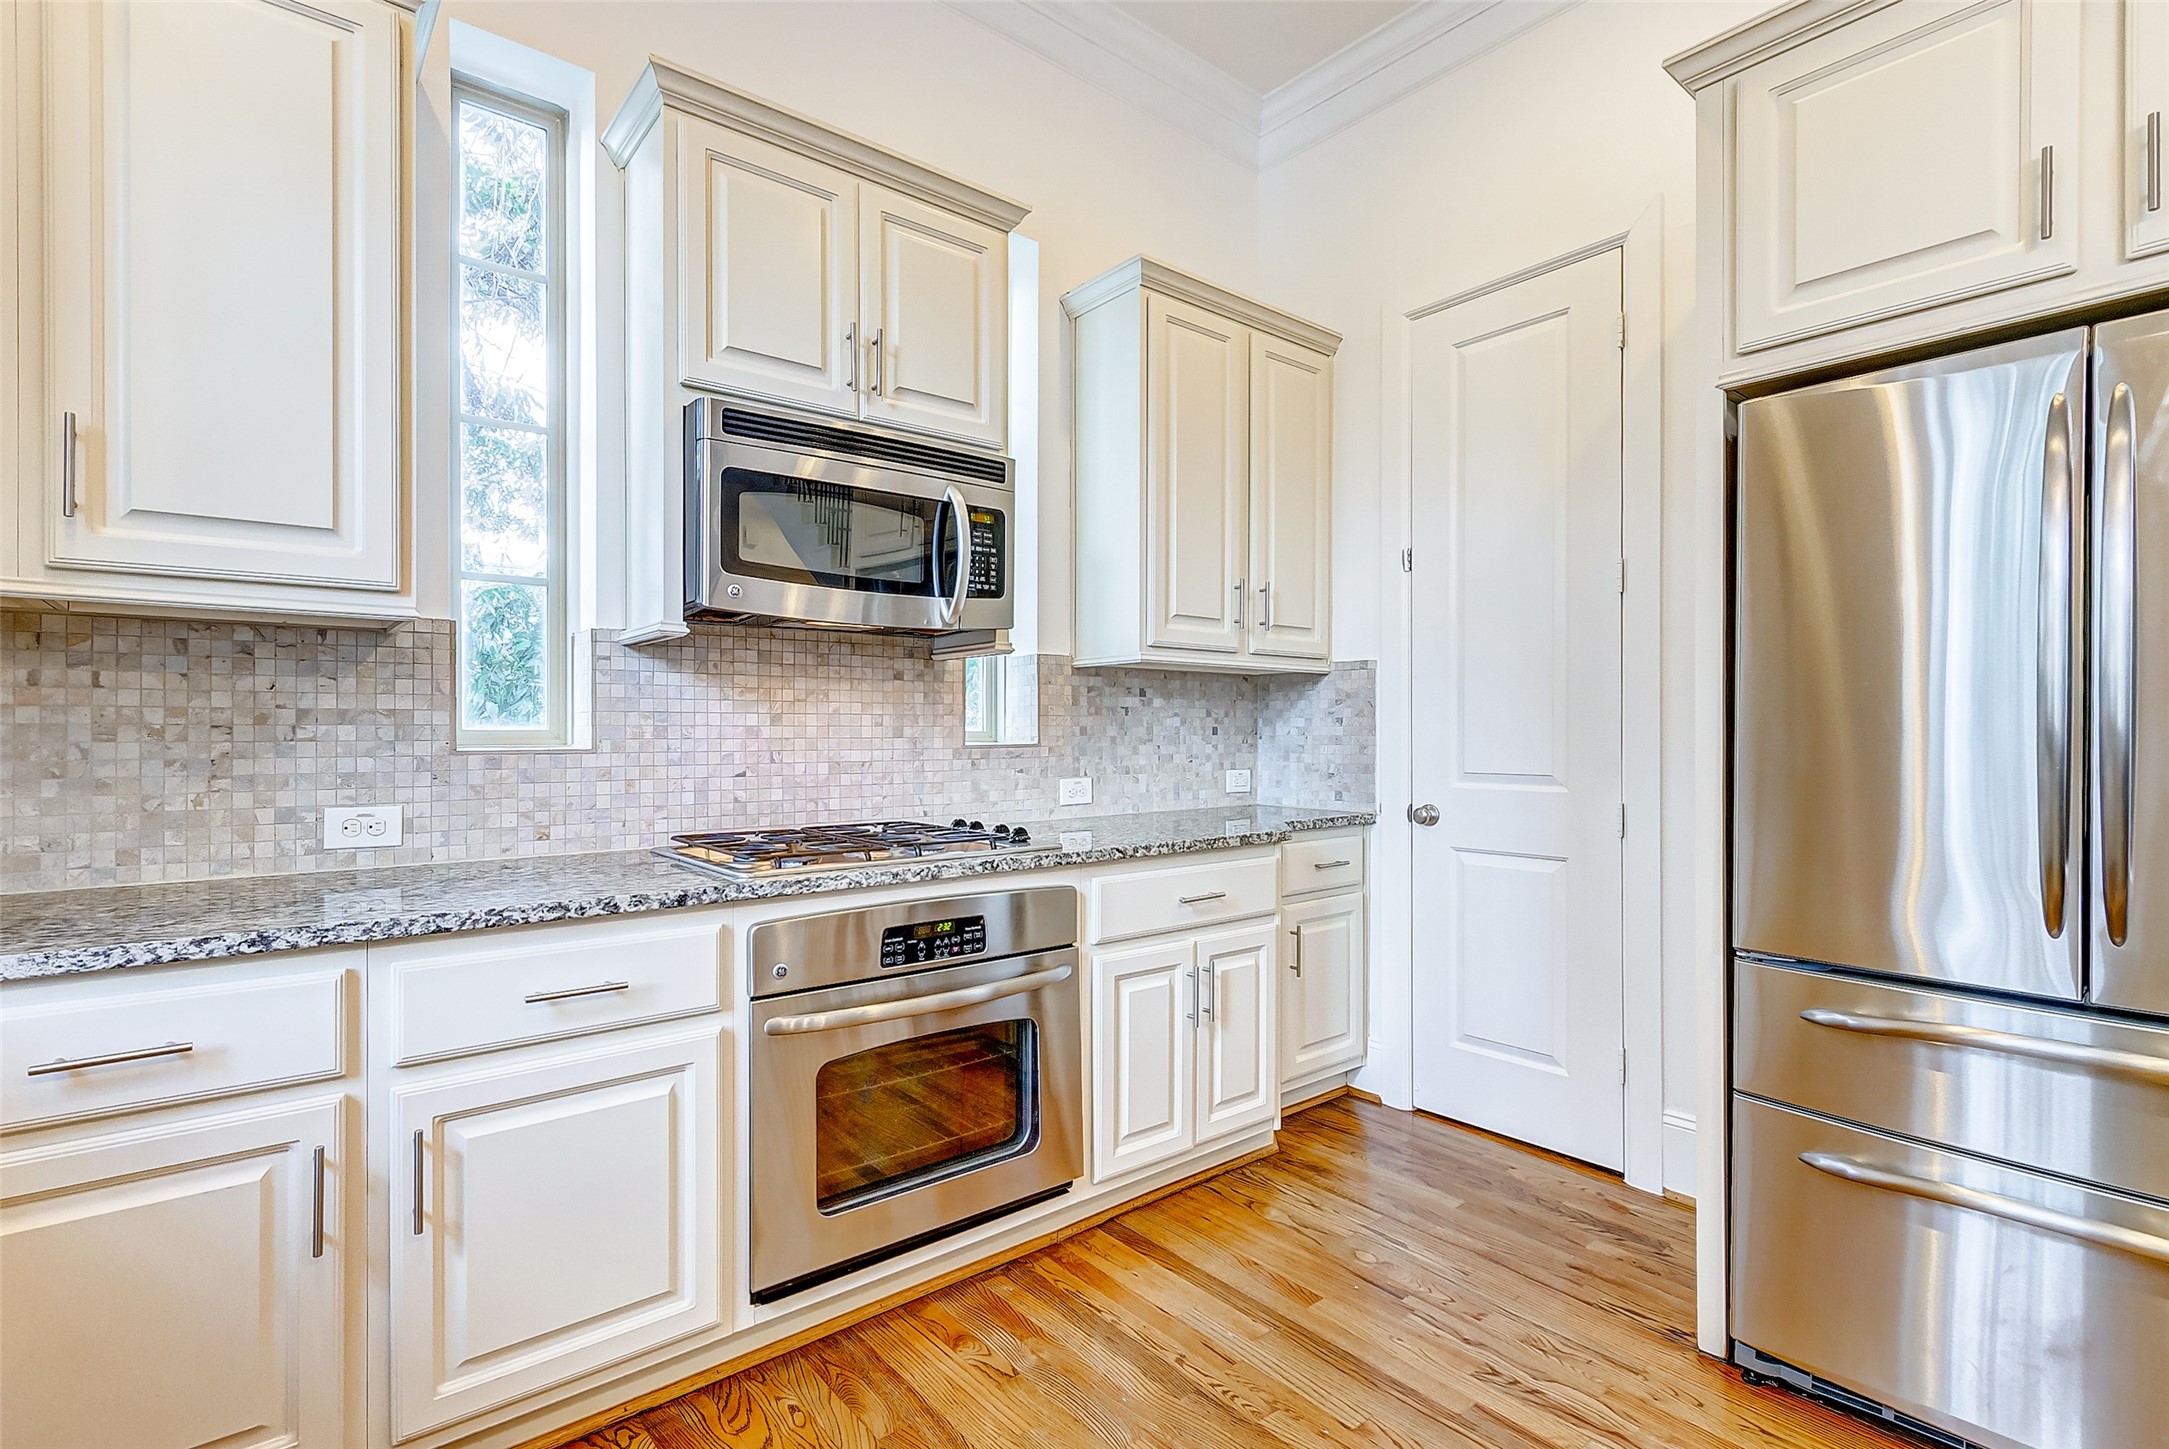 The chef in your family will love the gas cooktop and spacious pantry.